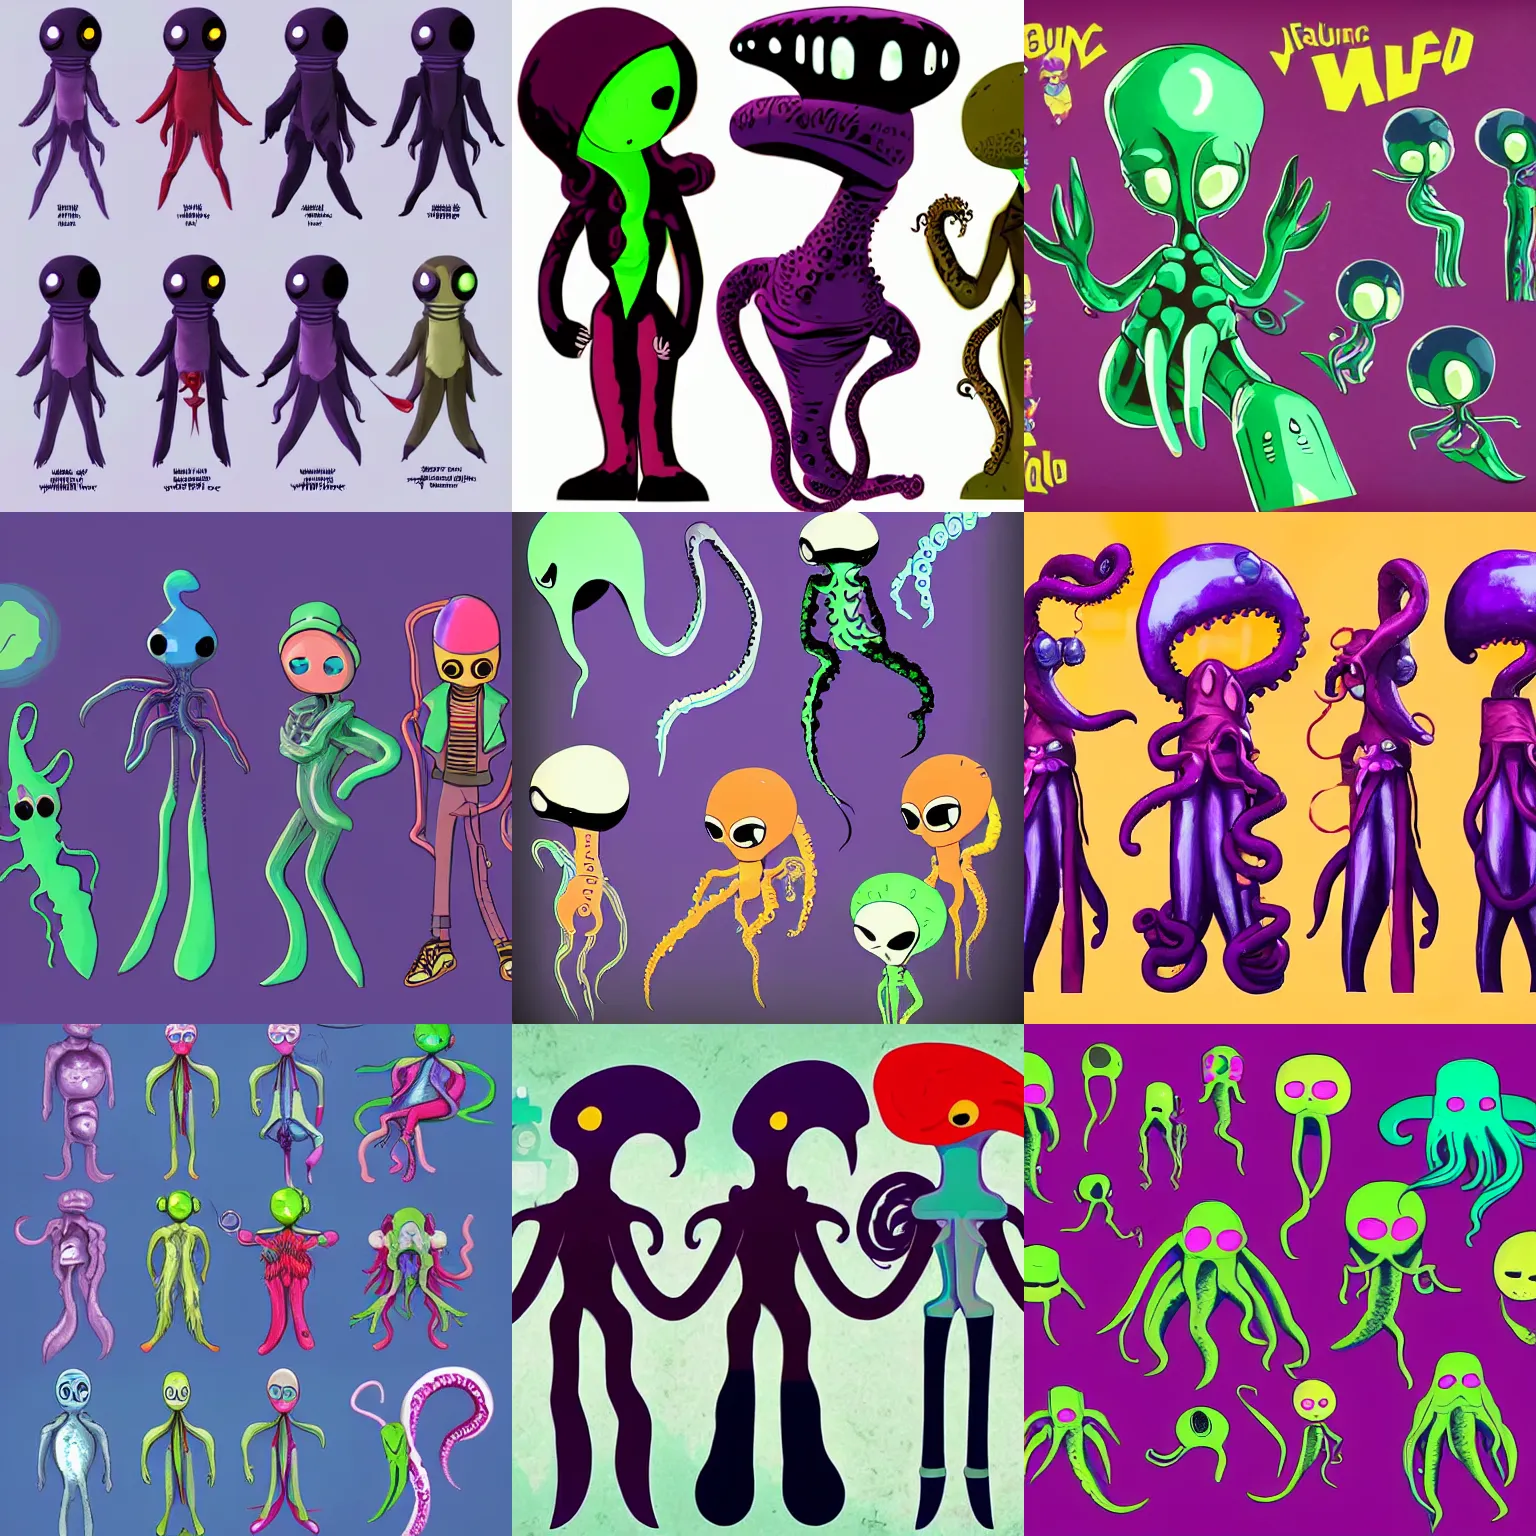 Prompt: an adorable vintage vaporwave colorful tall lean vampire ninja aliens with big black alien eyes and a squid beak with three webbed tentacle arms and skinny thin human legs inspired as playable characters design sheets for the newest psychonauts video game made by double fine done by tim shafer that focuses on an ocean setting with help from the artists of odd world inhabitants inc and Lauren faust from her work on dc superhero girls and lead artist Andy Suriano from rise of the teenage mutant ninja turtles on nickelodeon using artistic cues for the game fret nice and art direction from the Sony 2018 animated film spiderverse